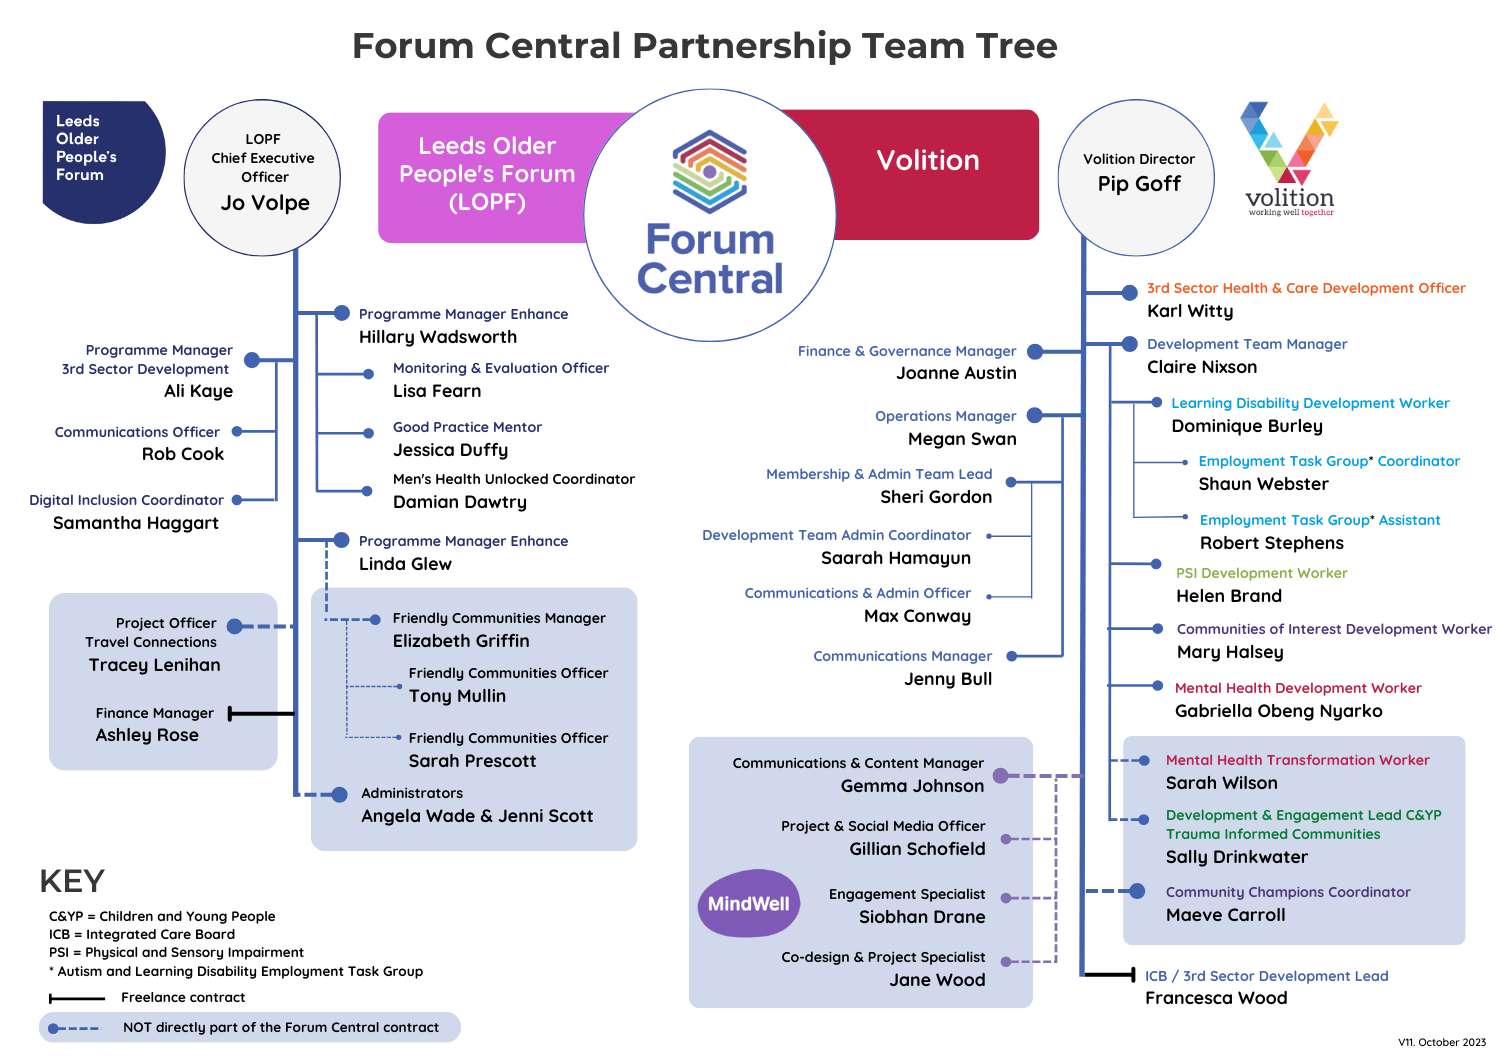 Image of the forum central team tree, a pdf version is available as it is a very text heavy image